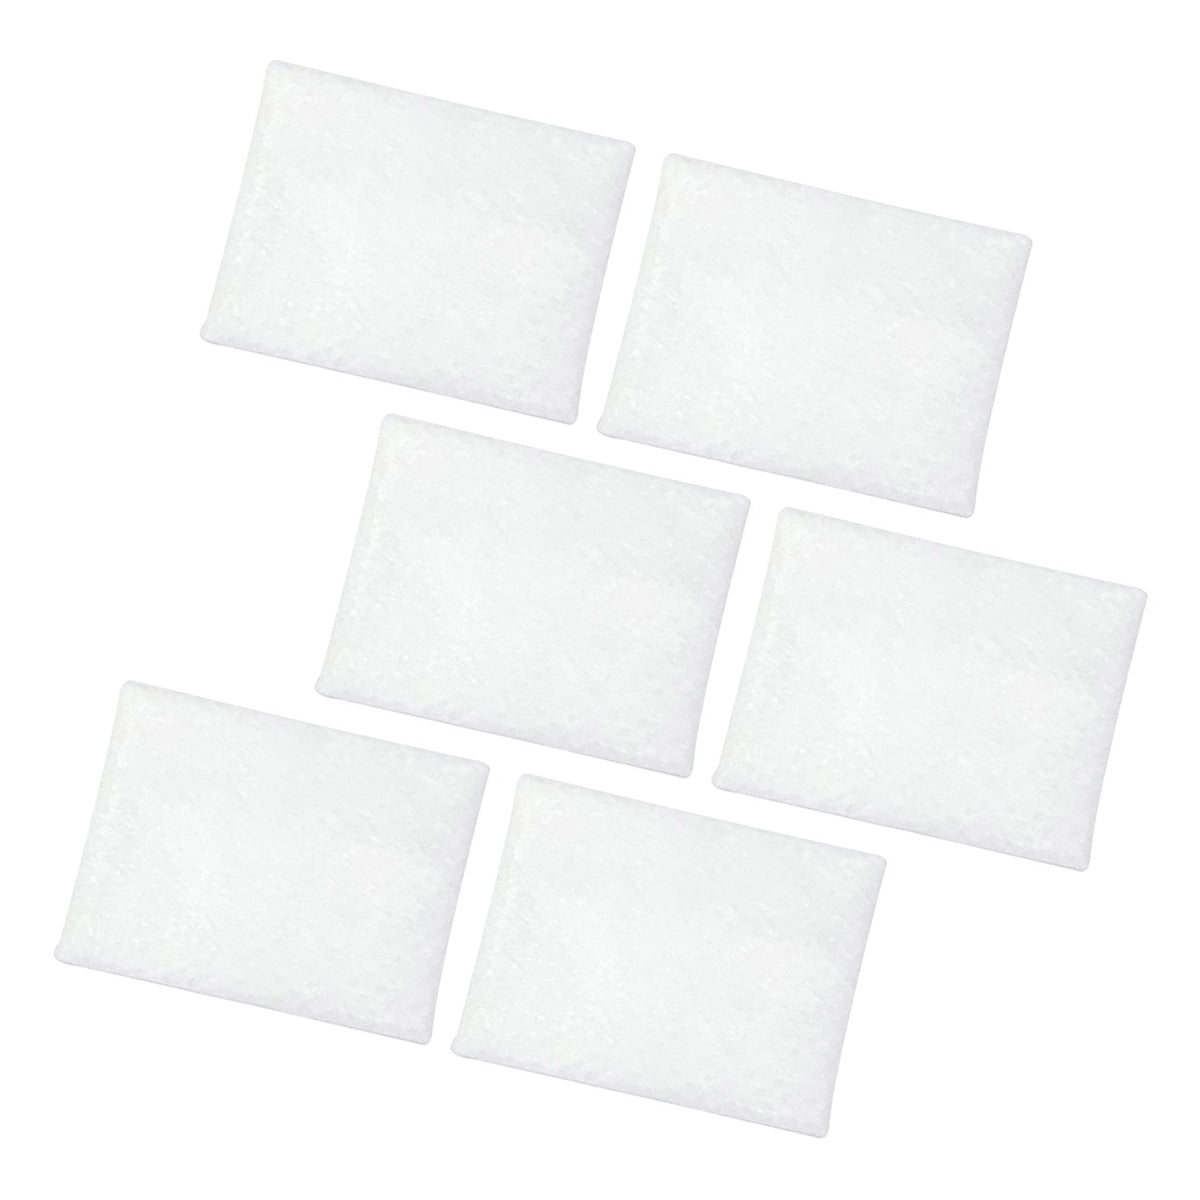 3B's White Ultra Fine Filters are designed for use with all Luna G3 Series CPAP and BiPAP machines. Disposable white ultra fine filters offer higher filtration capabilities than the standard, reusable filters supplied with Luna G3 CPAPs &amp; BiPAPs.